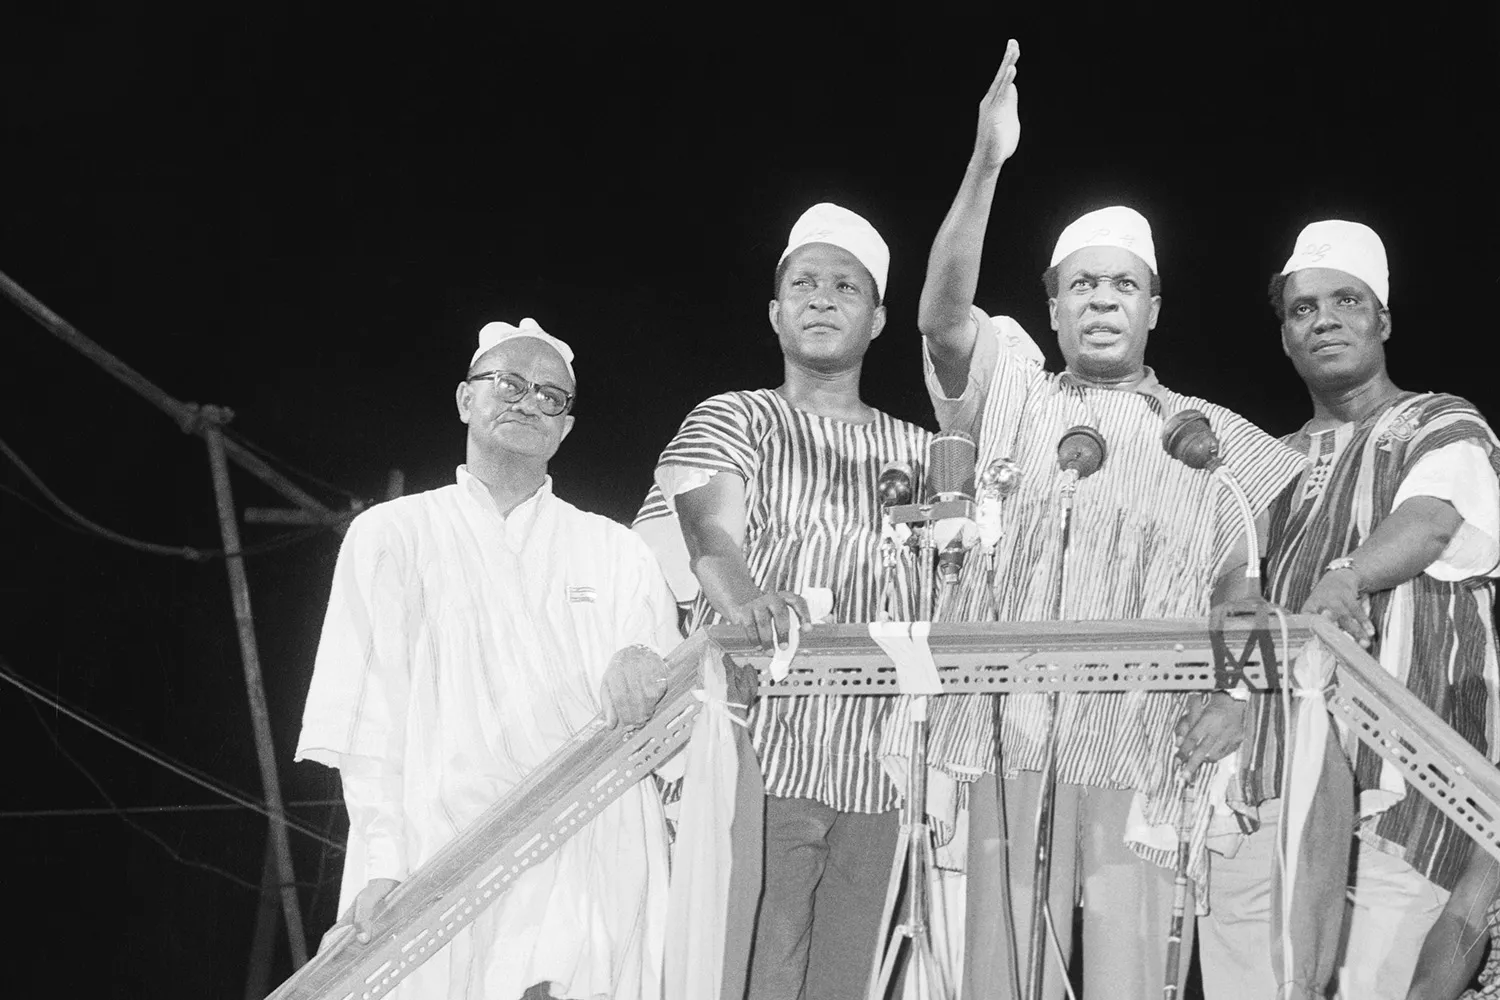 Prime Minister Kwame Nkrumah (center) waves to a celebrating crowd in Accra.